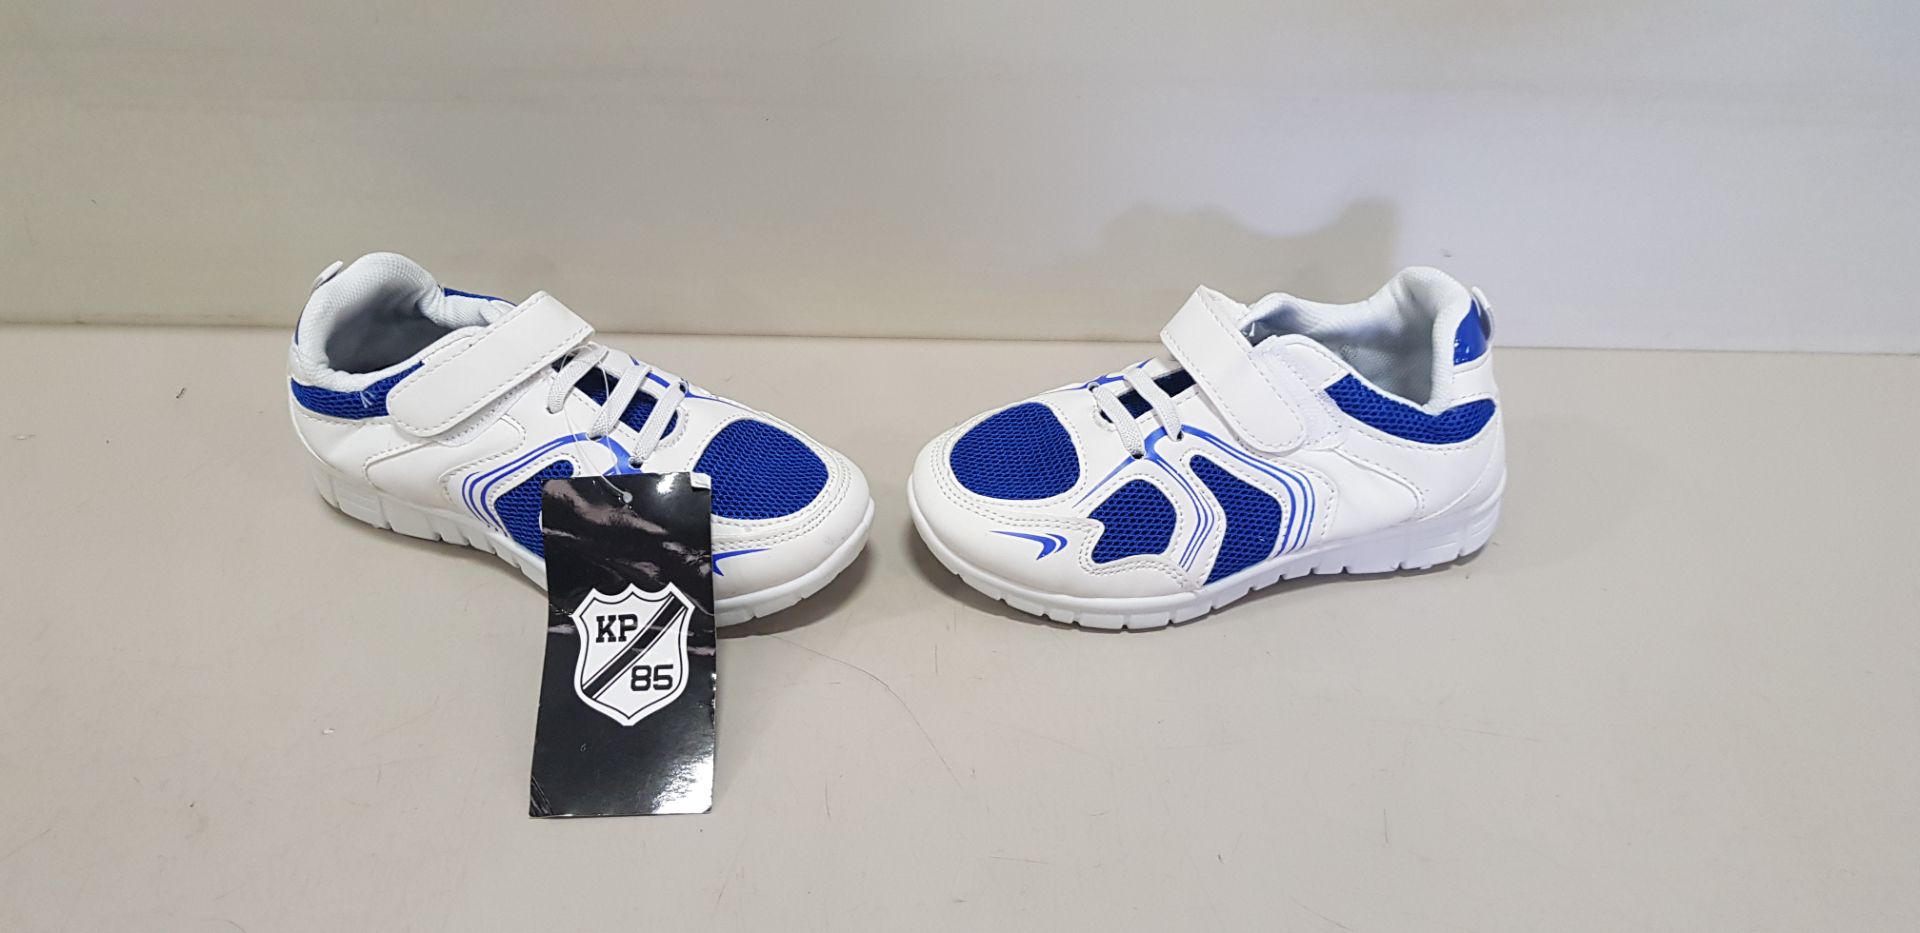 38 X BRAND NEW KP 85 CHILDRENS TRAINERS (SIZES 2,5 AND 6) - IN 3 BAGS